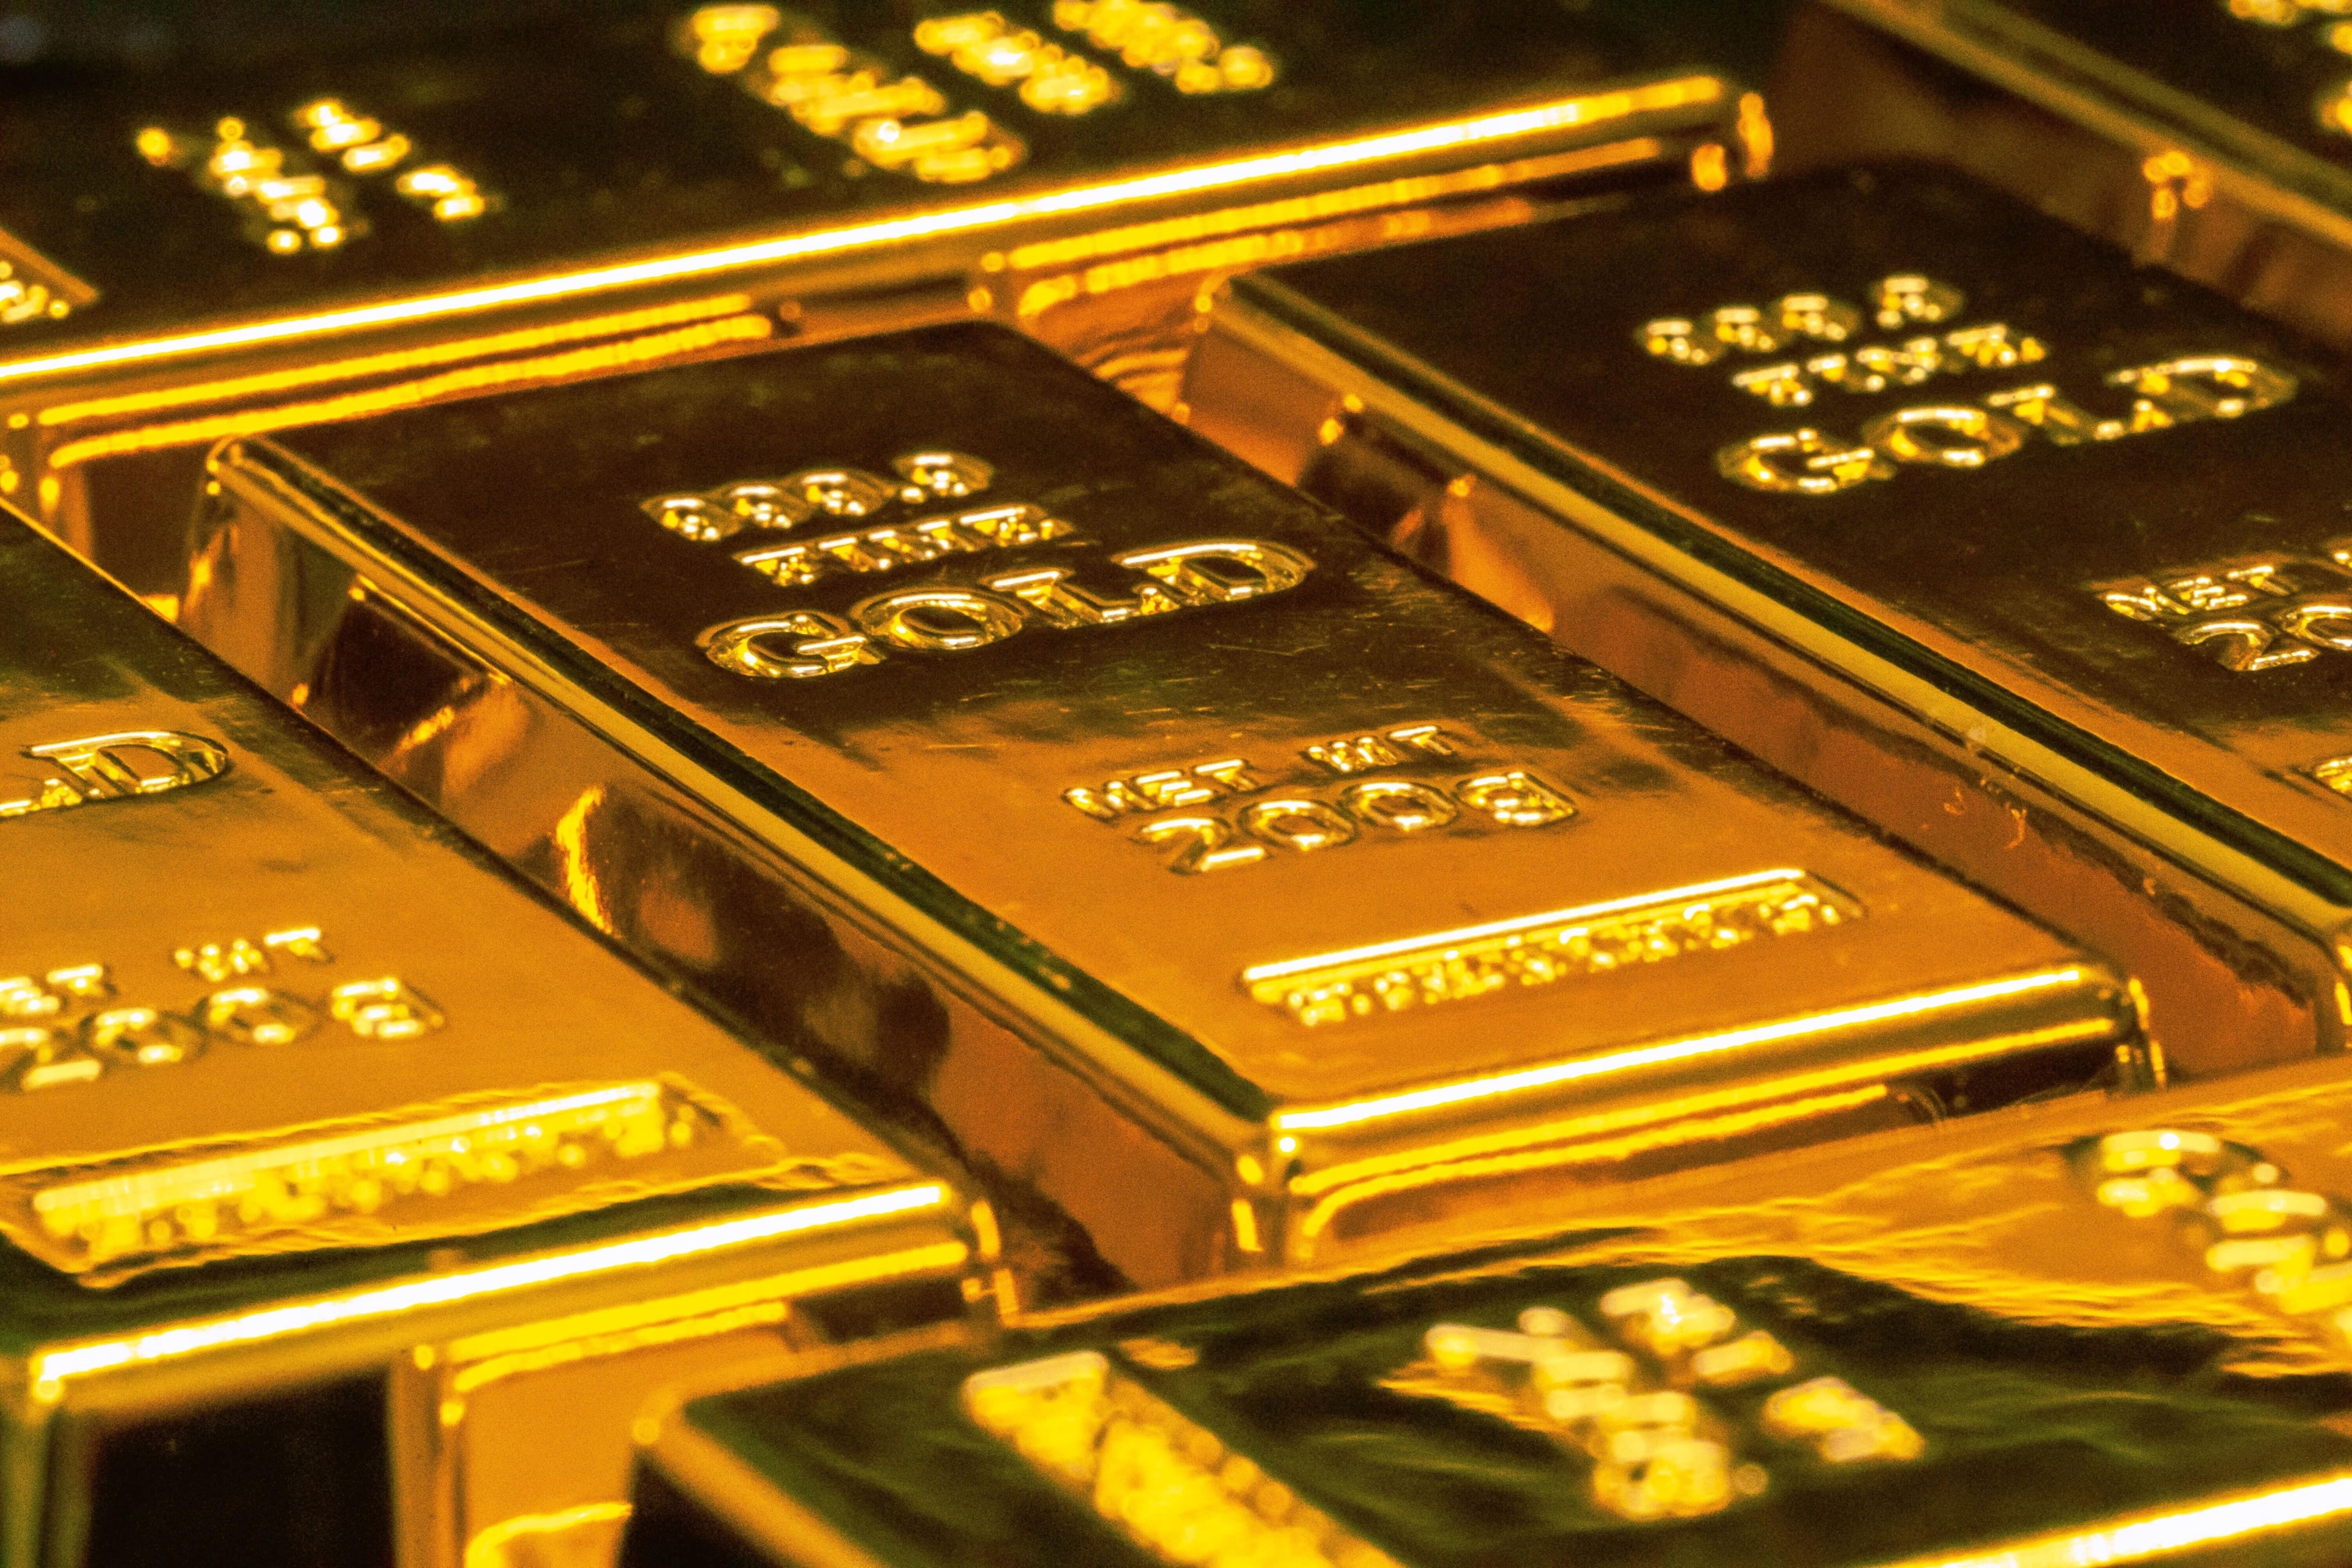 Gold: Gold prices continued to rise after their best monthly gain in nine months in Feb, after Western countries slapped fresh sanctions on Russia for invading Ukraine and President Vladimir Putin put his country's nuclear deterrent on high alert.